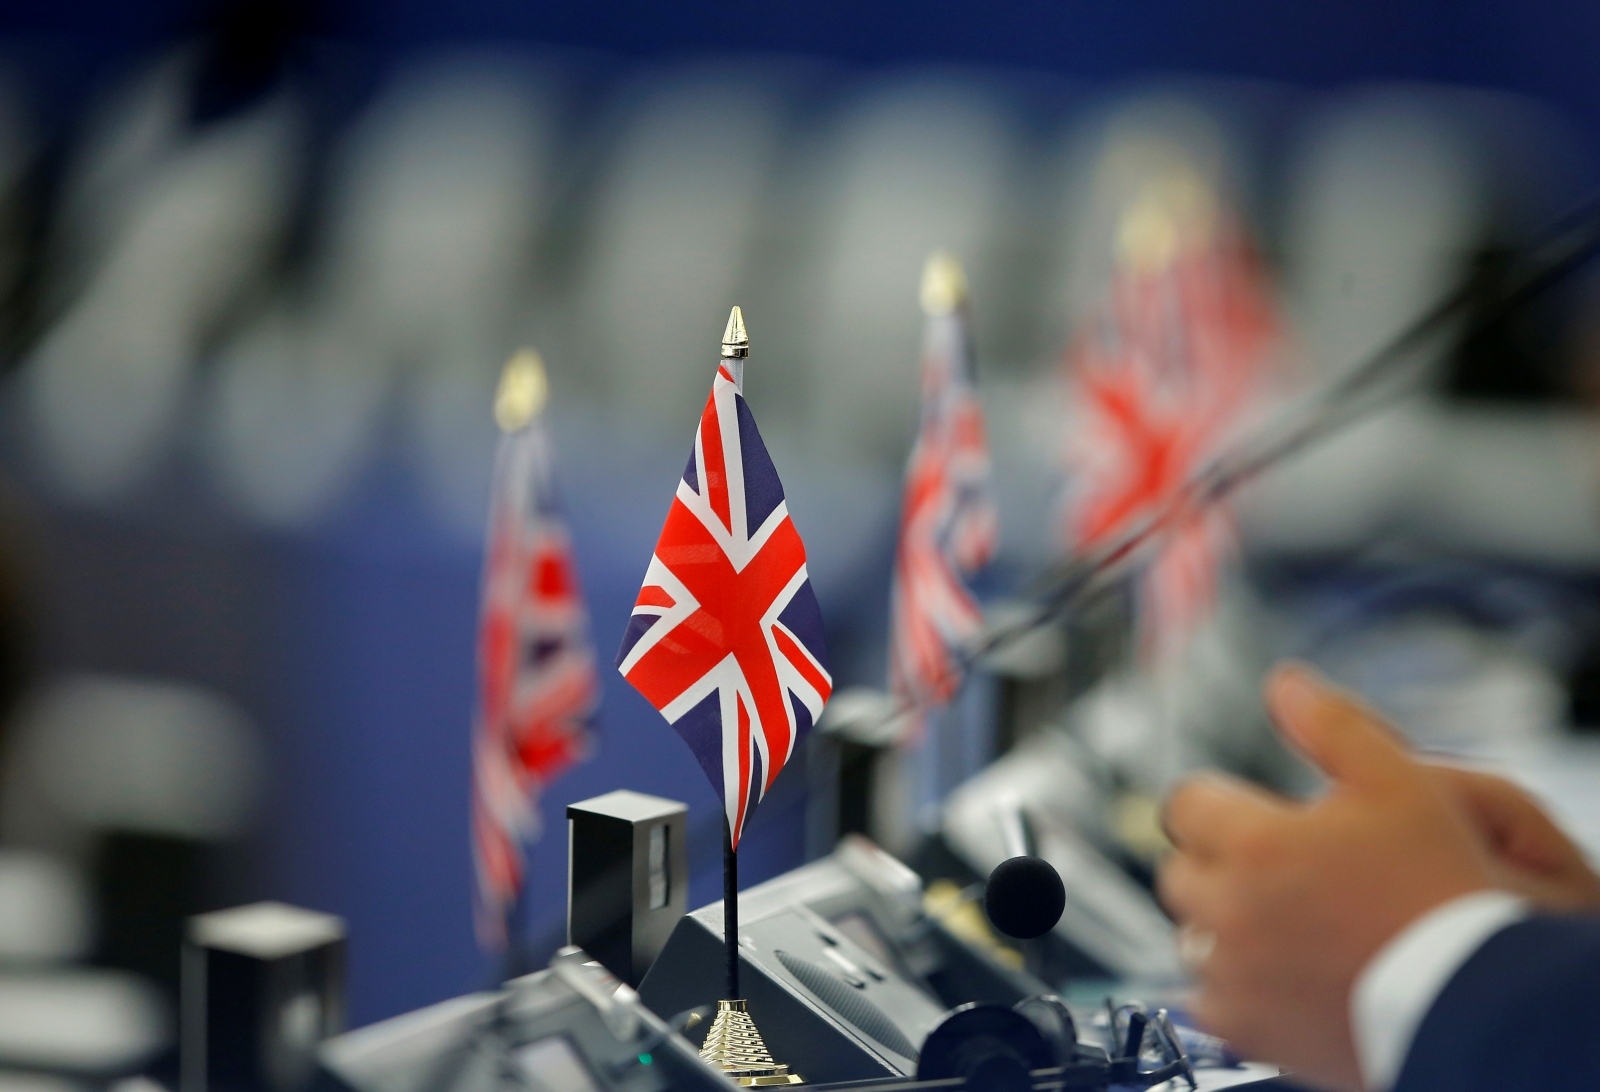 British Union Jack flags are seen on the desks of Members of the Brexit Party during a debate on the last European summit, at the European Parliament in Strasbourg British Union Jack flags are seen on the desks of Members of the Brexit Party during a debate on the last European summit, at the European Parliament in Strasbourg, France, July 4, 2019.  REUTERS/Vincent Kessler VINCENT KESSLER